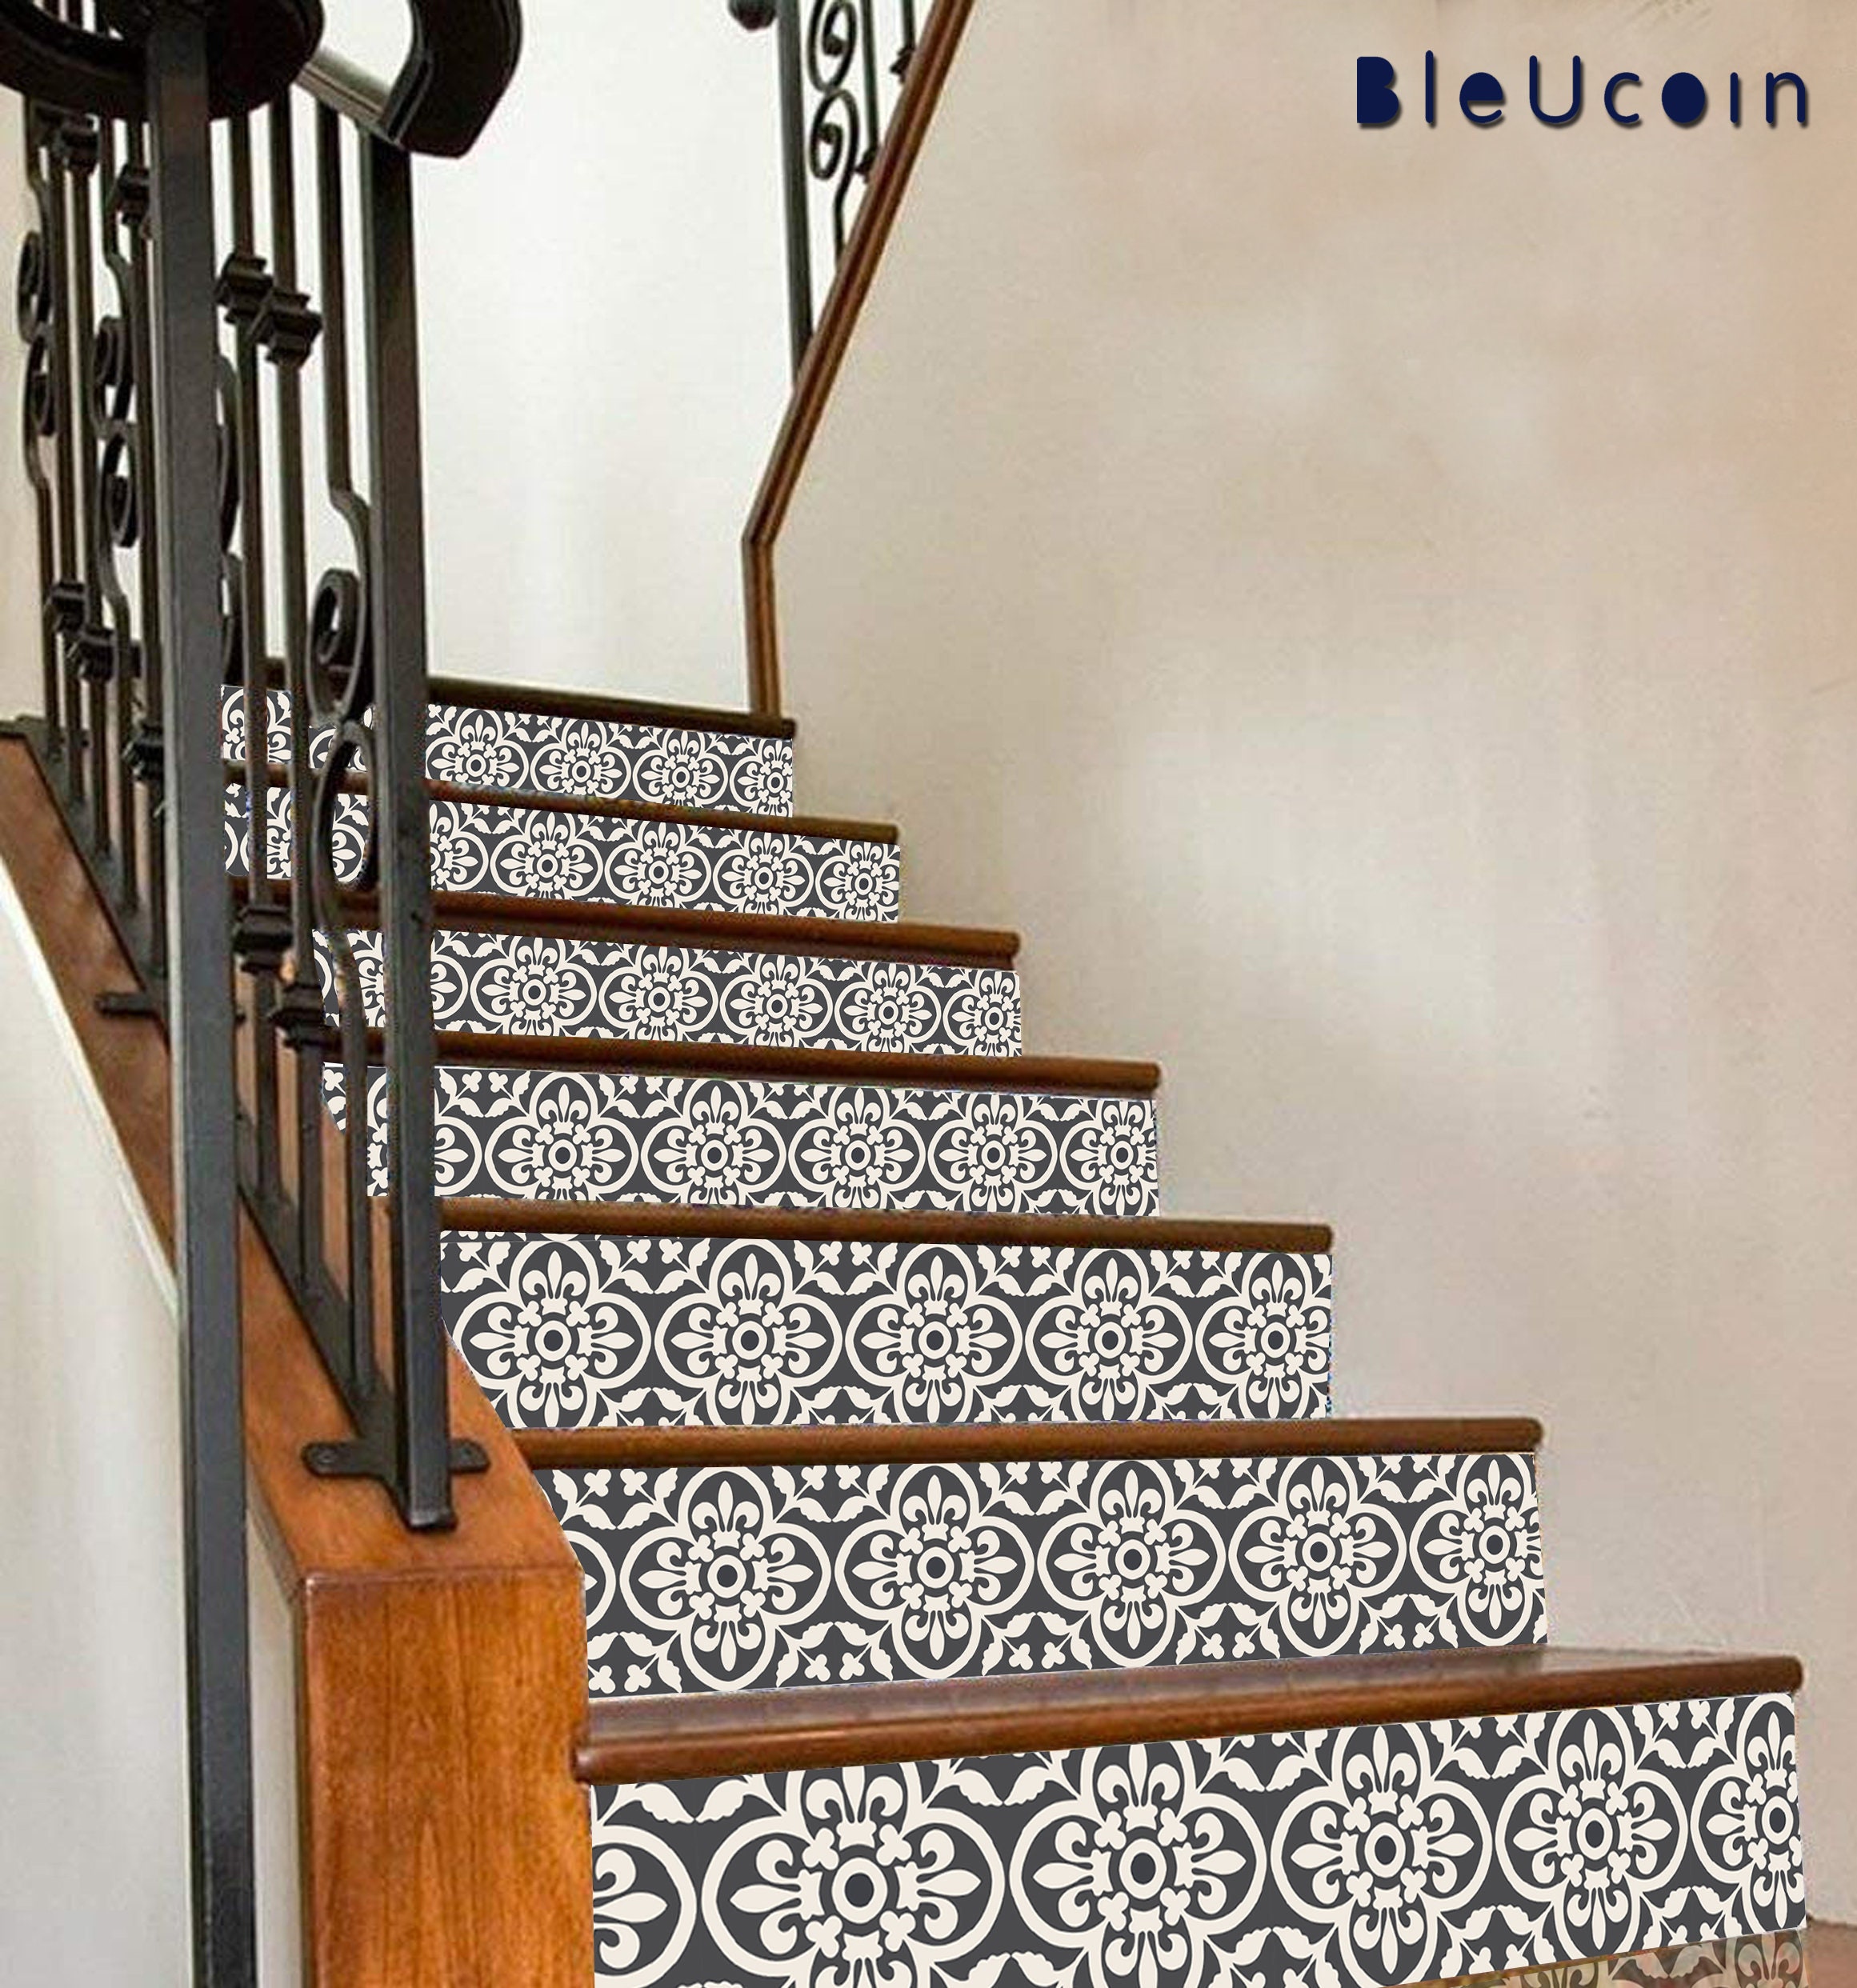 6Pcs NewKingStar Tile Stickers Decals Stair Decoration Stair Decals Stickers Vinyl Stickers for Stairs Self Adhesive Stair Decals Removable Decorative Tile Decals for Bathroom Kitchen